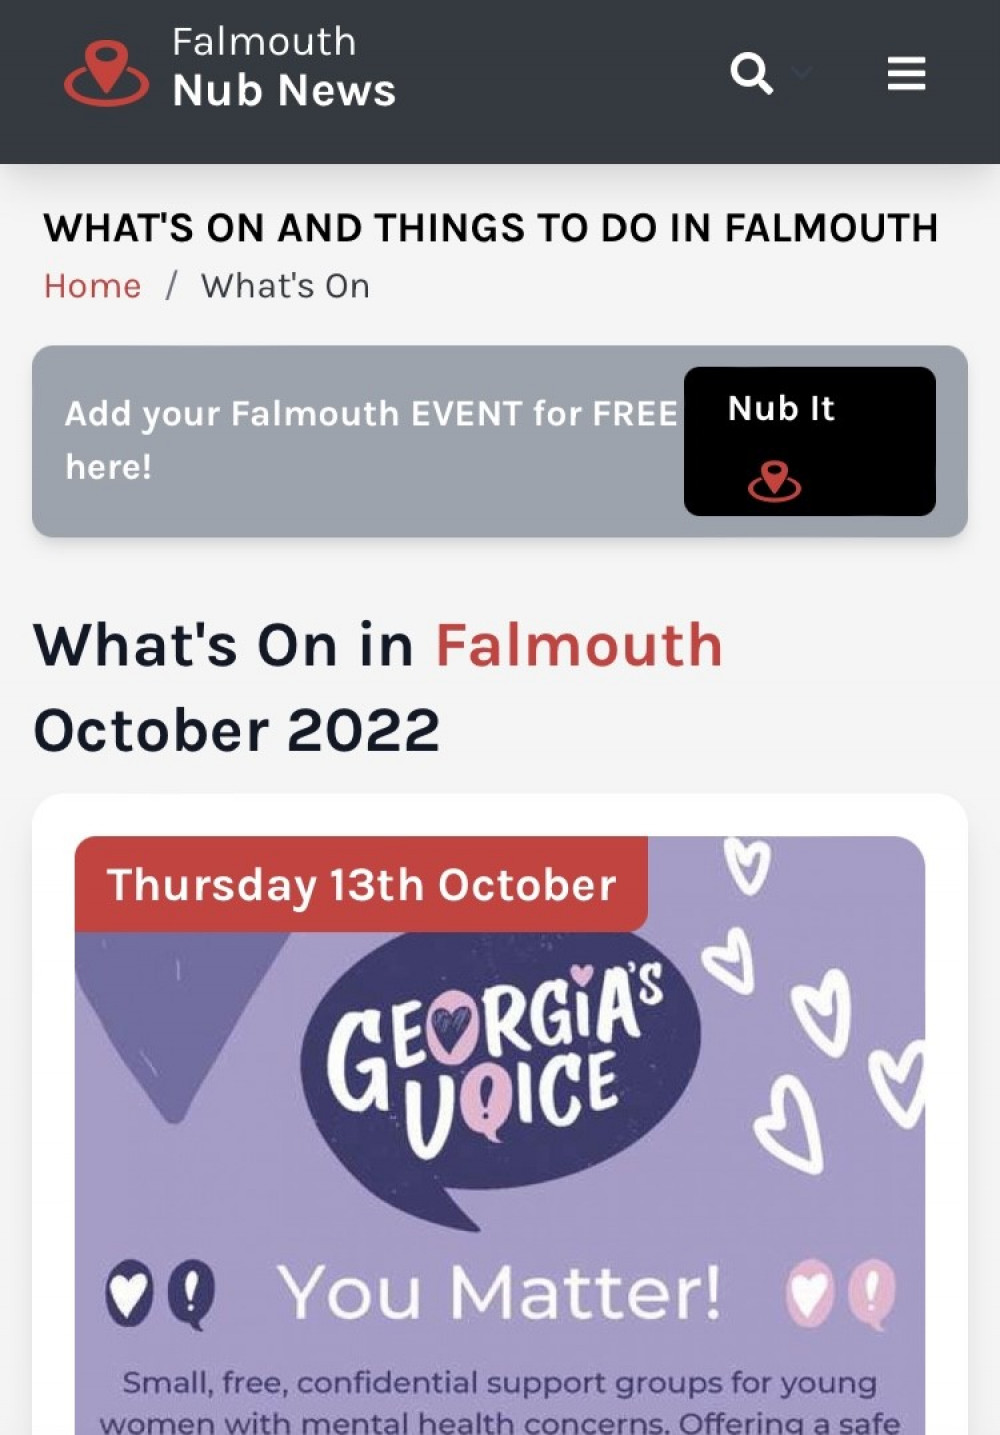 Share your events in Falmouth for free on our What's On page. 